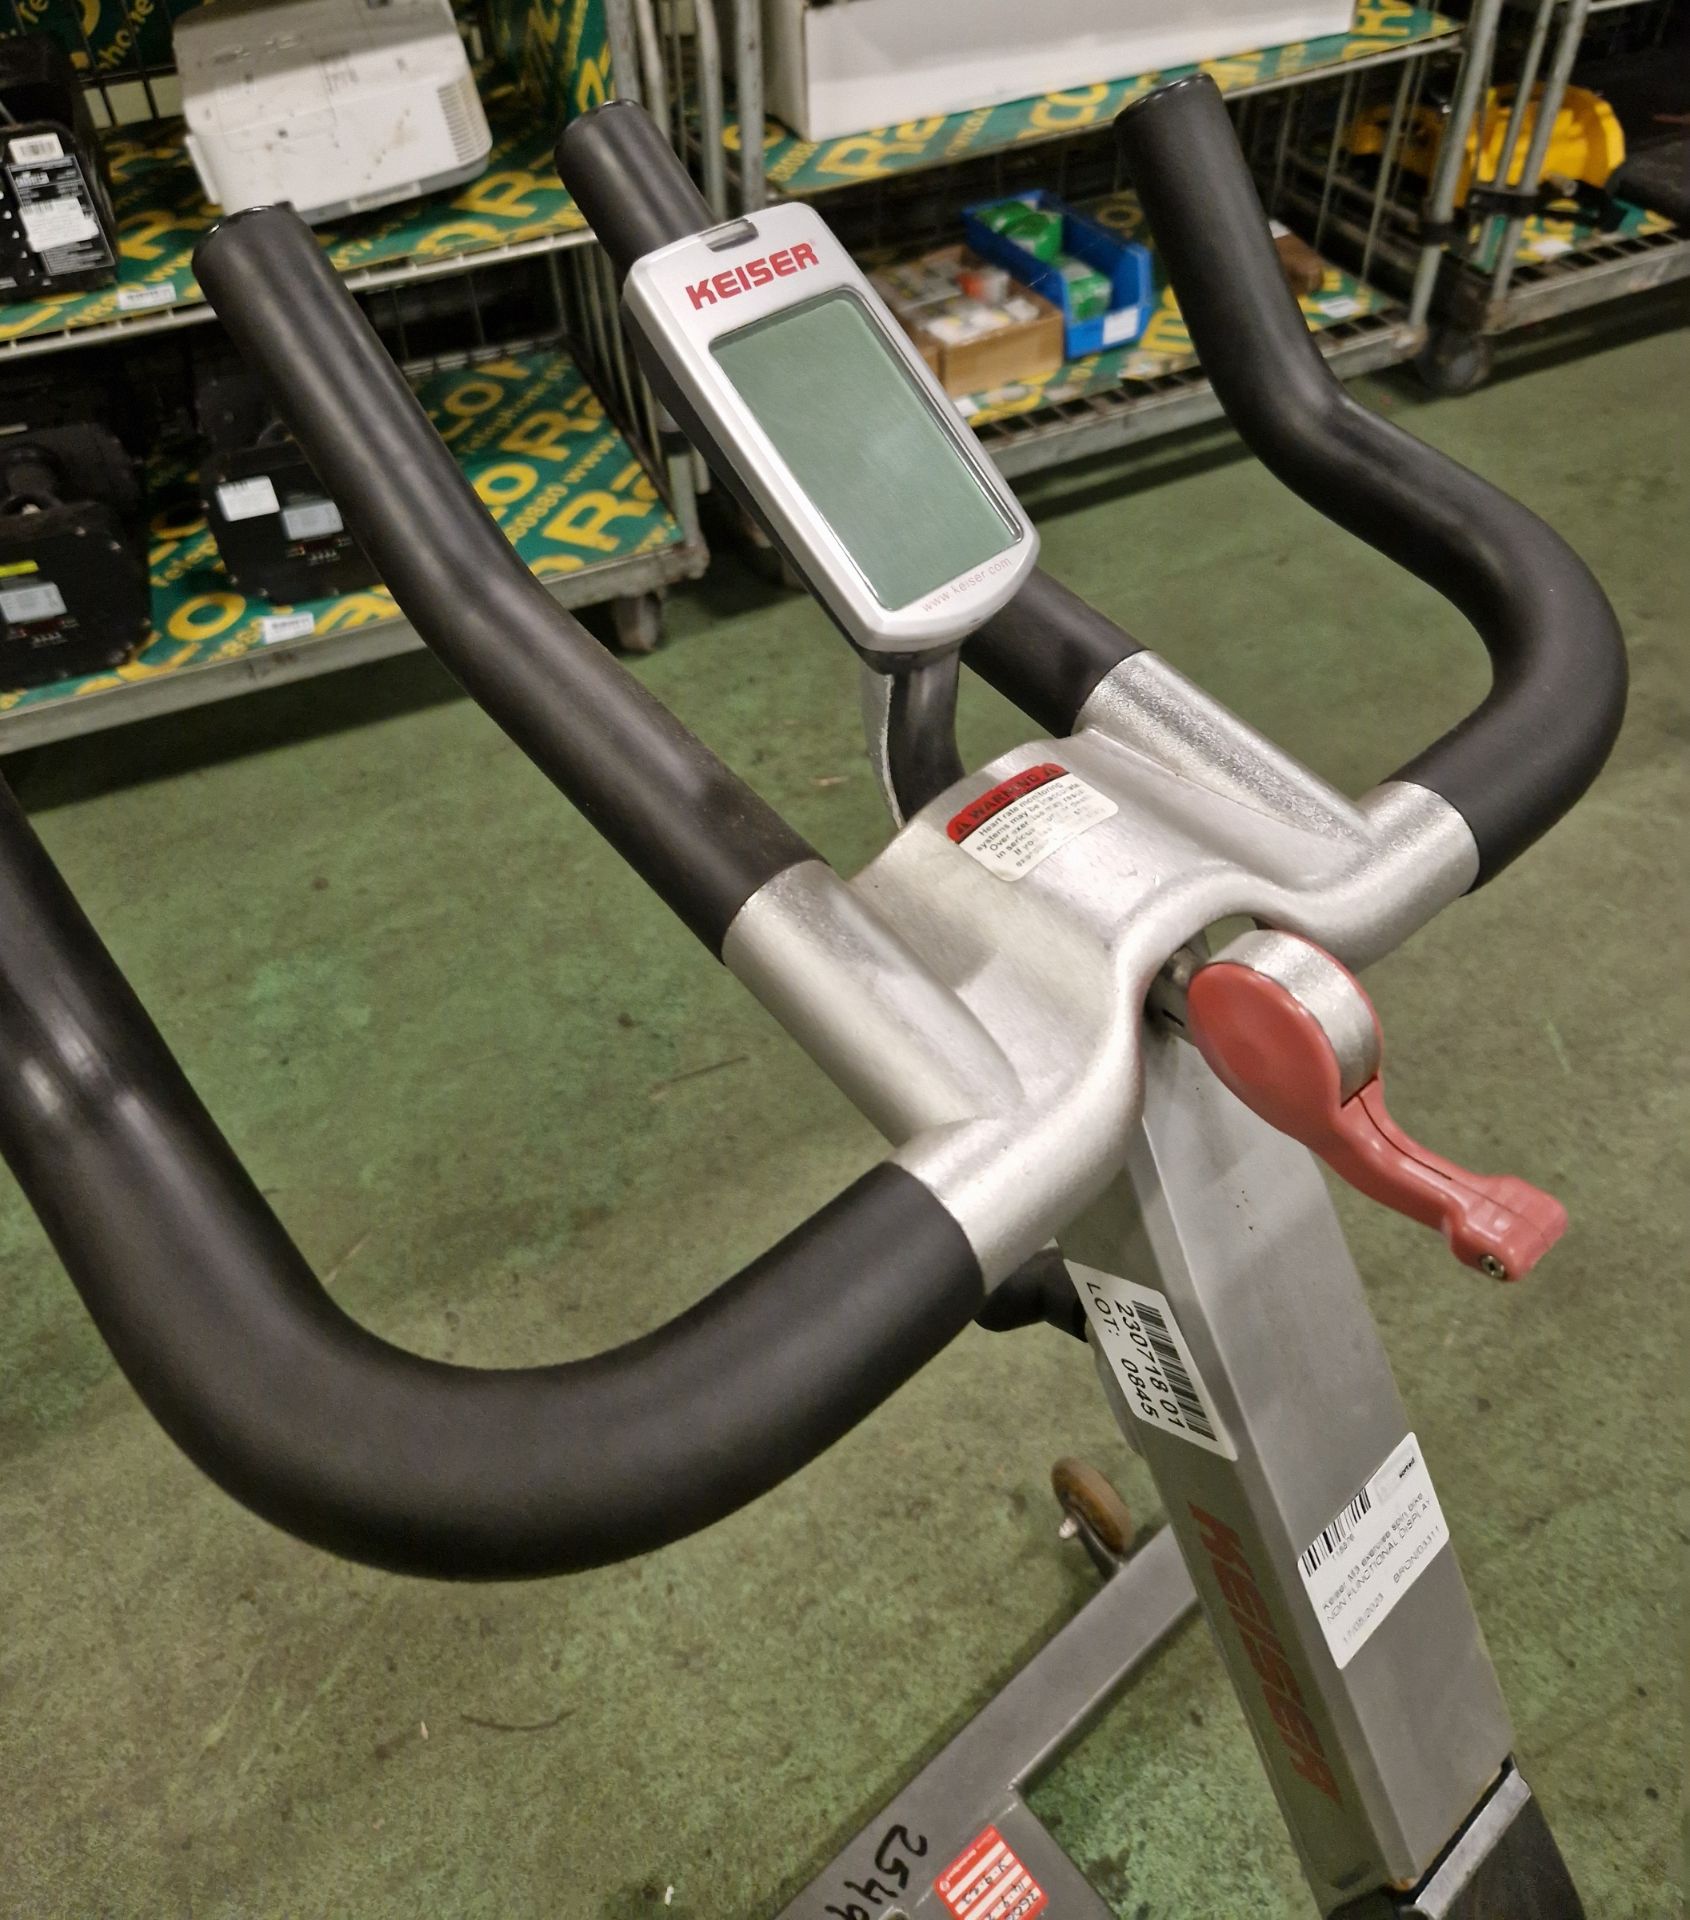 Keiser M3 exercise spin bike - NON FUNCTIONAL DISPLAY - Image 5 of 5